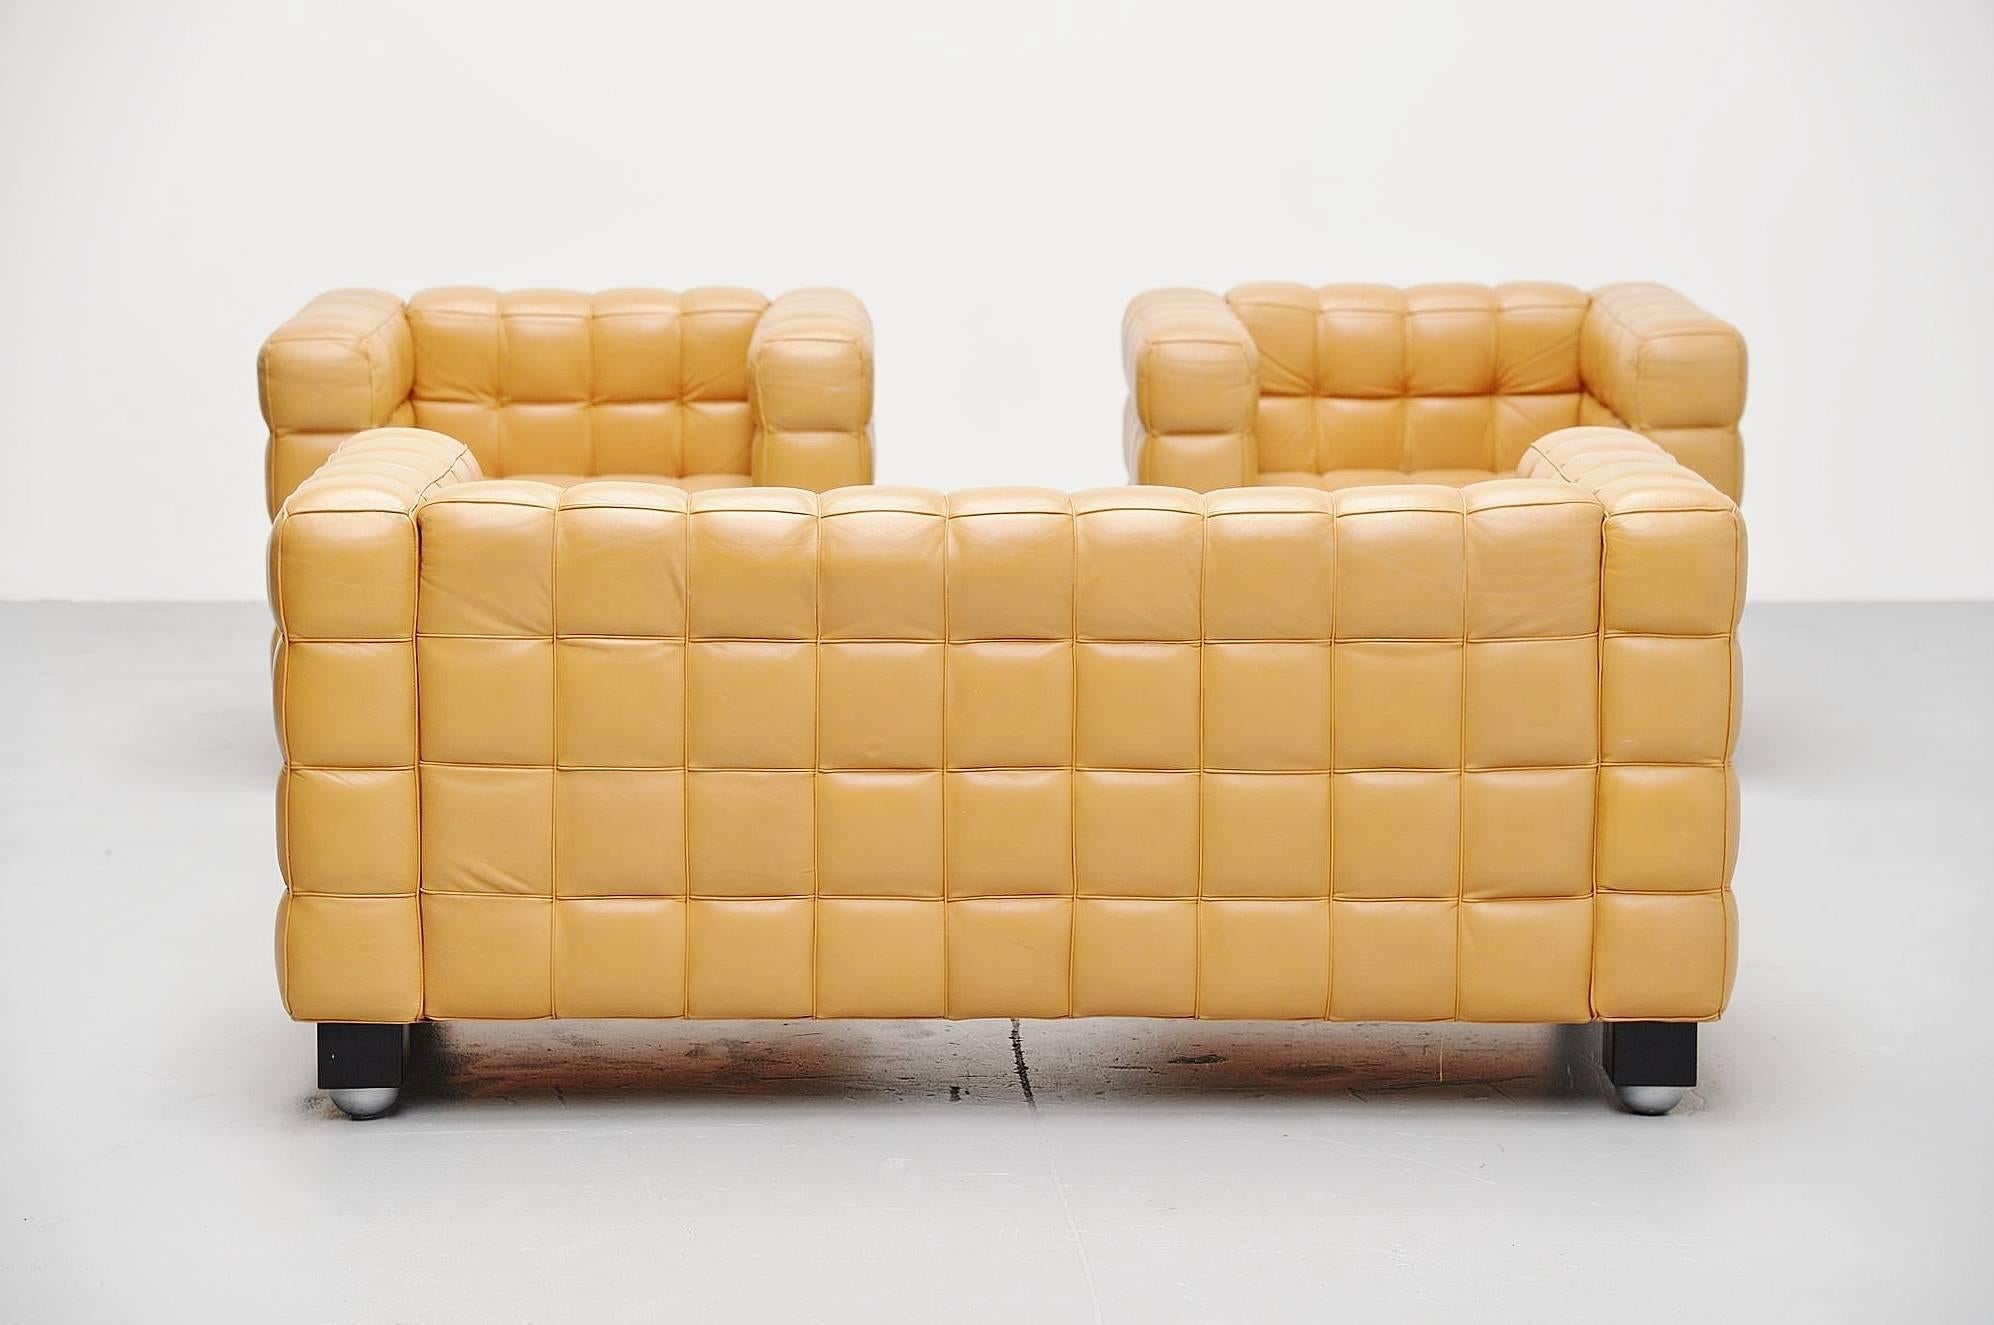 Super quality 'Kubus' sofa set designed by Josef Hoffmann, manufactured by Wittmann, Austria, circa 1980. The sofa was designed in 1910 and later Wittmann took it into production. This set is made of camel leather and is quality finished all-over.